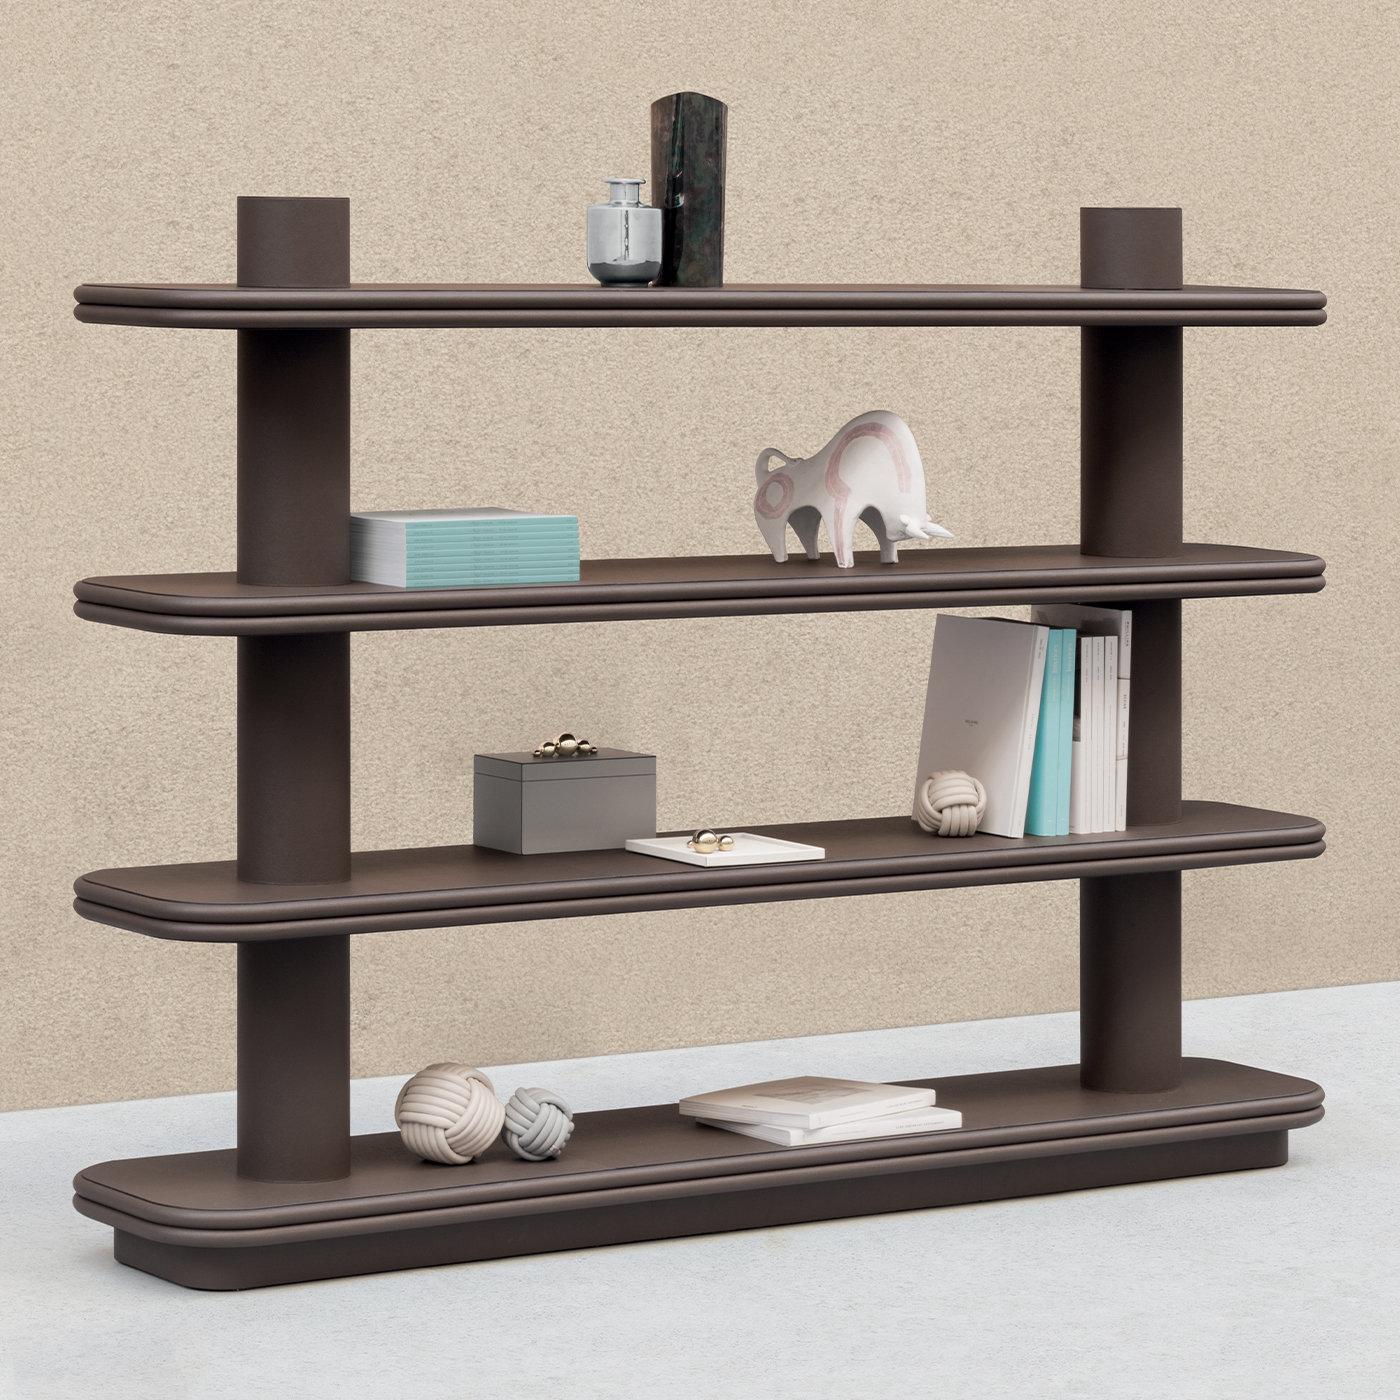 Leather bookcase by Stephane Parmentier for Giobagnara. 
The object presented in the image has following finish: F09 Brown Nappa Leather

Entirely wrapped in soft brown nappa leather, this sophisticated bookcase is an exercise in balanced volumes